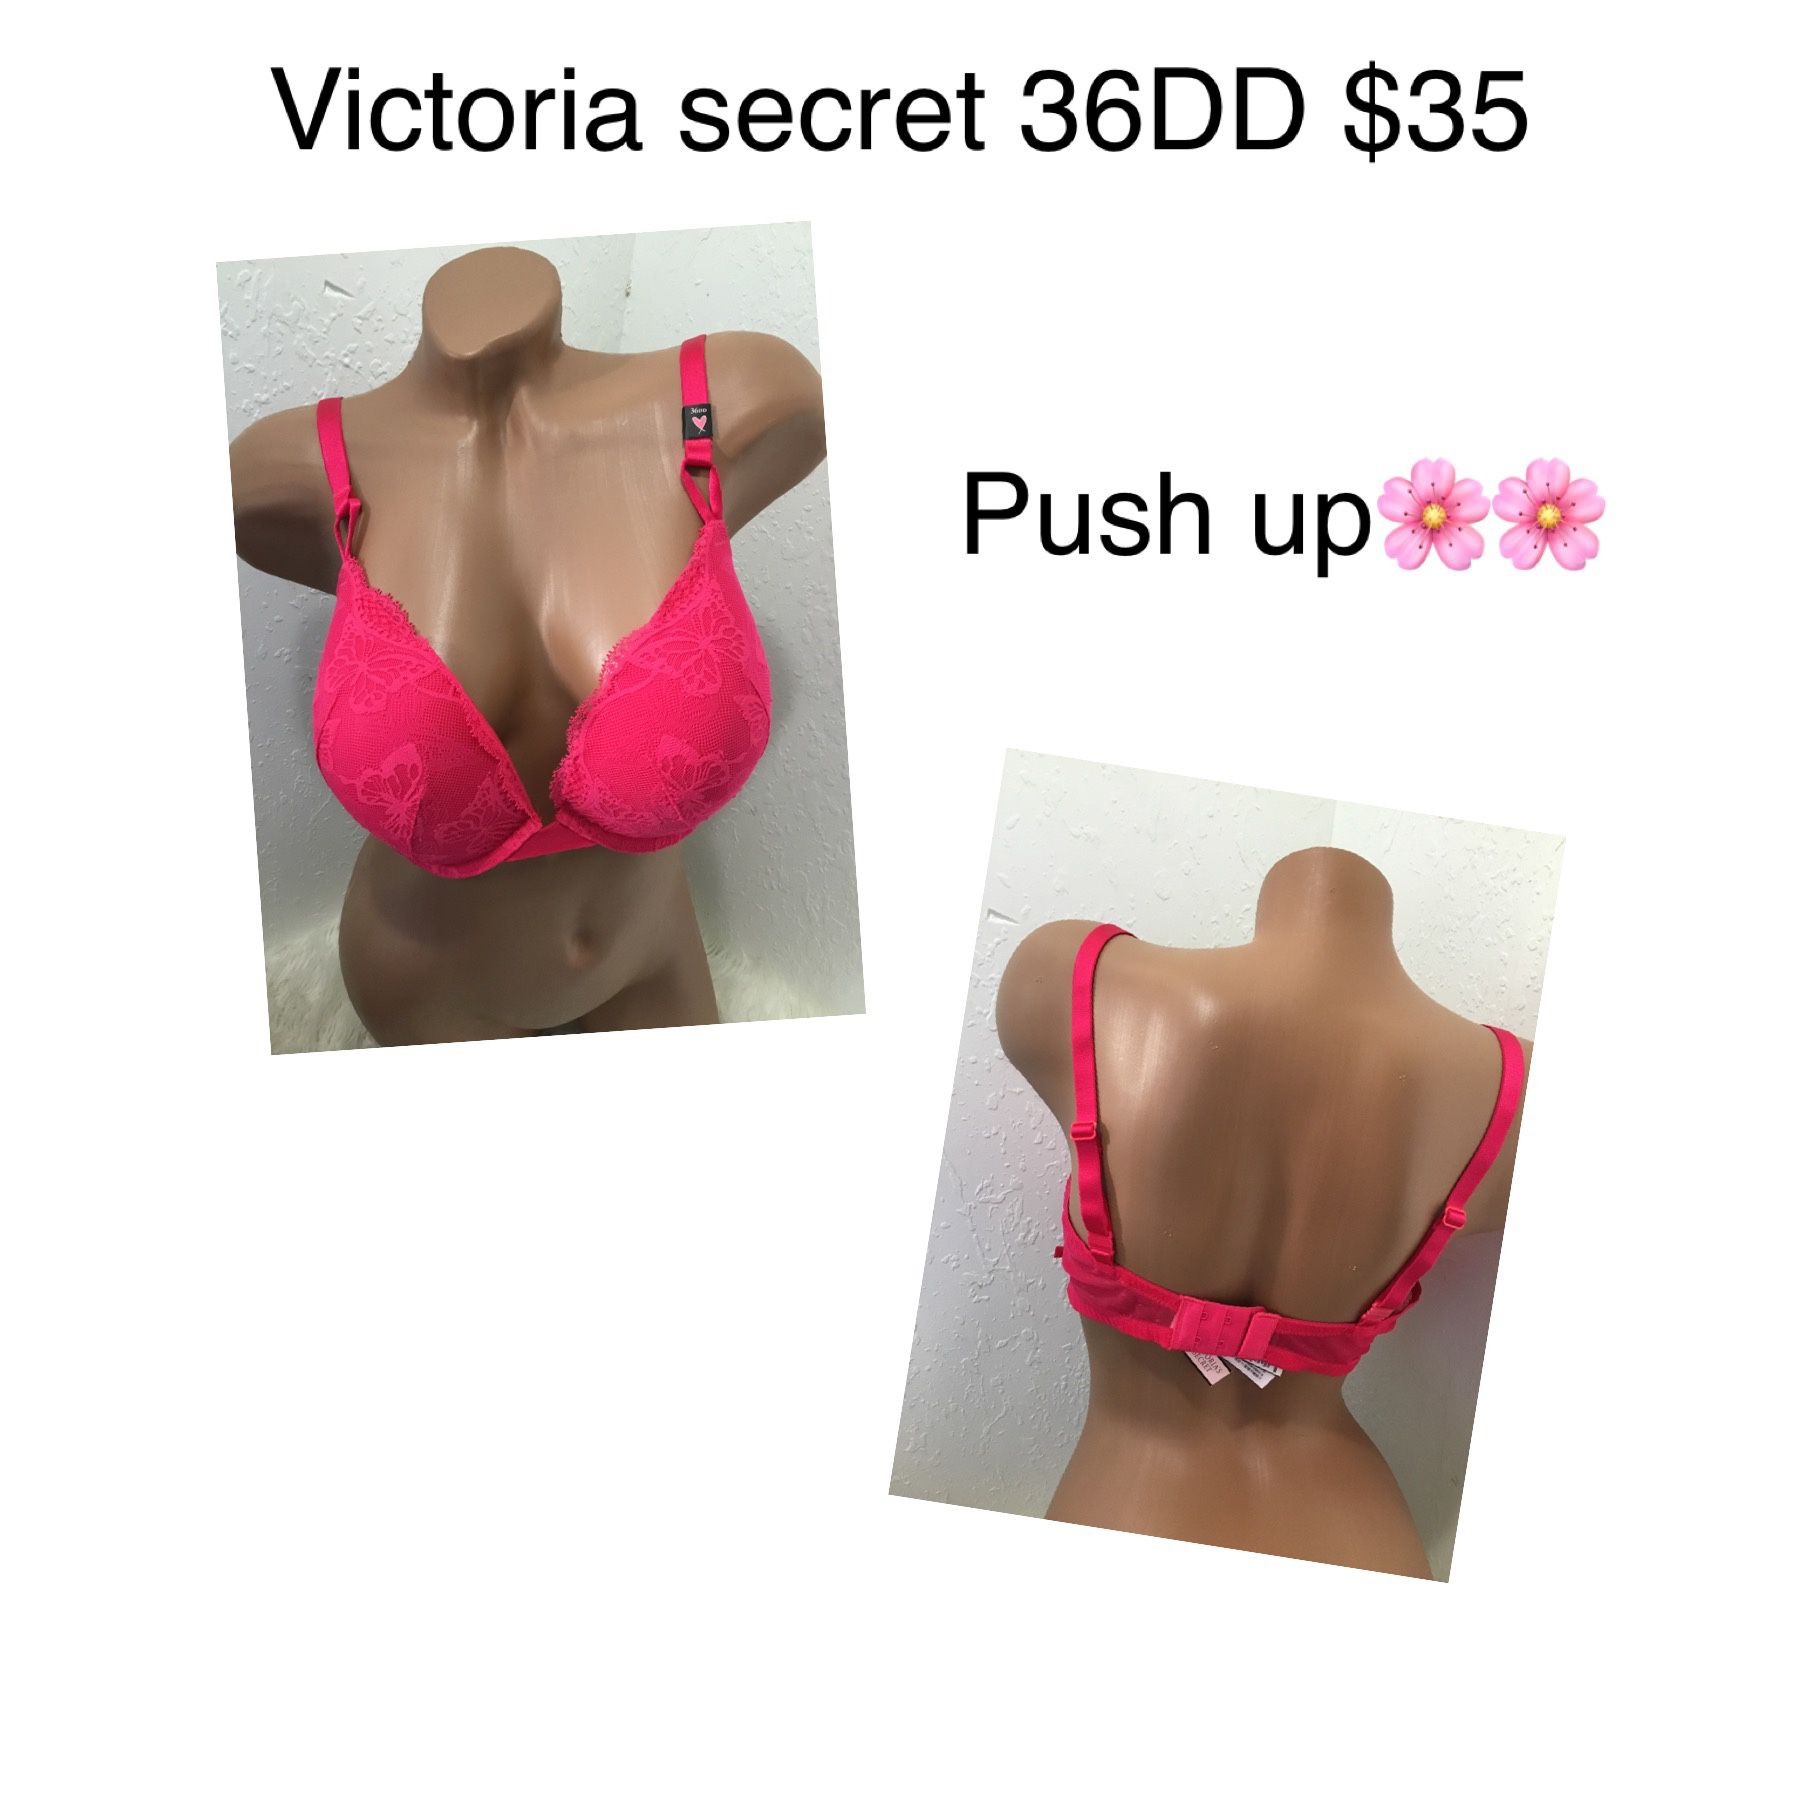 New Bra Victoria Secret 36dd Push Up firm Price for Sale in Los Angeles, CA  - OfferUp